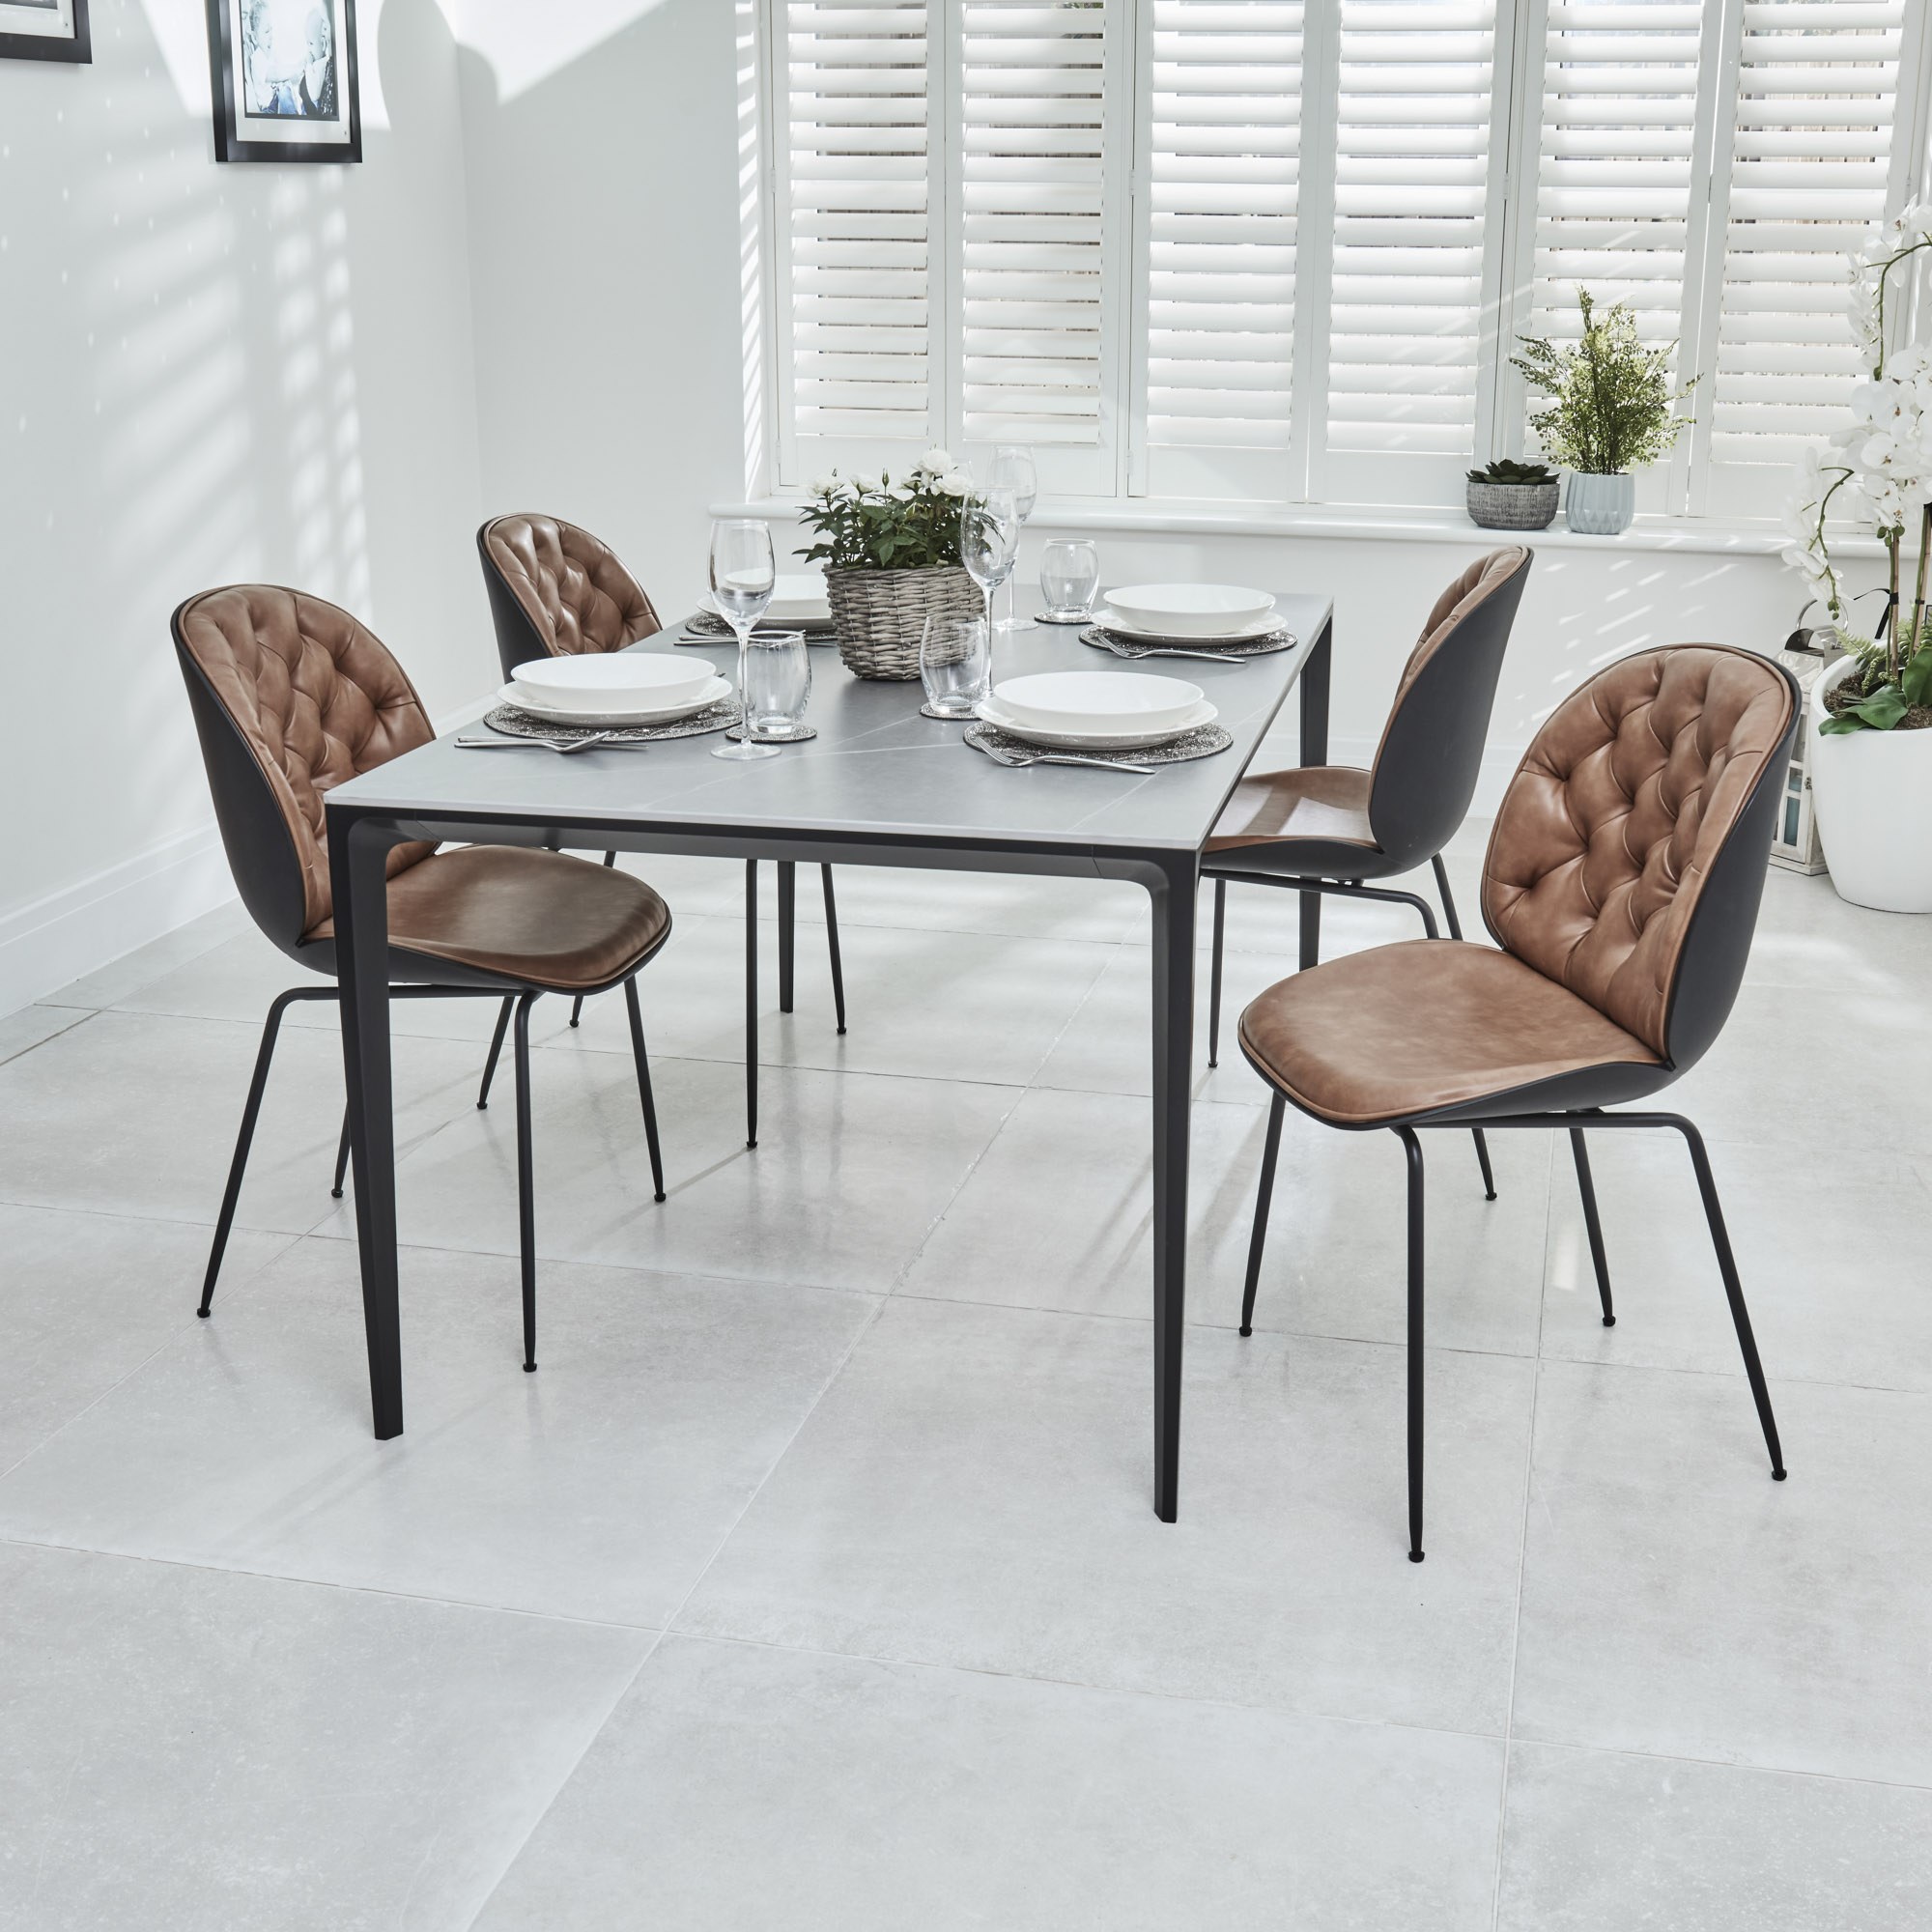 Bellagio 1.6M Grey Sintered Stone Dining Table Set with 4x Thiago Tan Dining Chairs